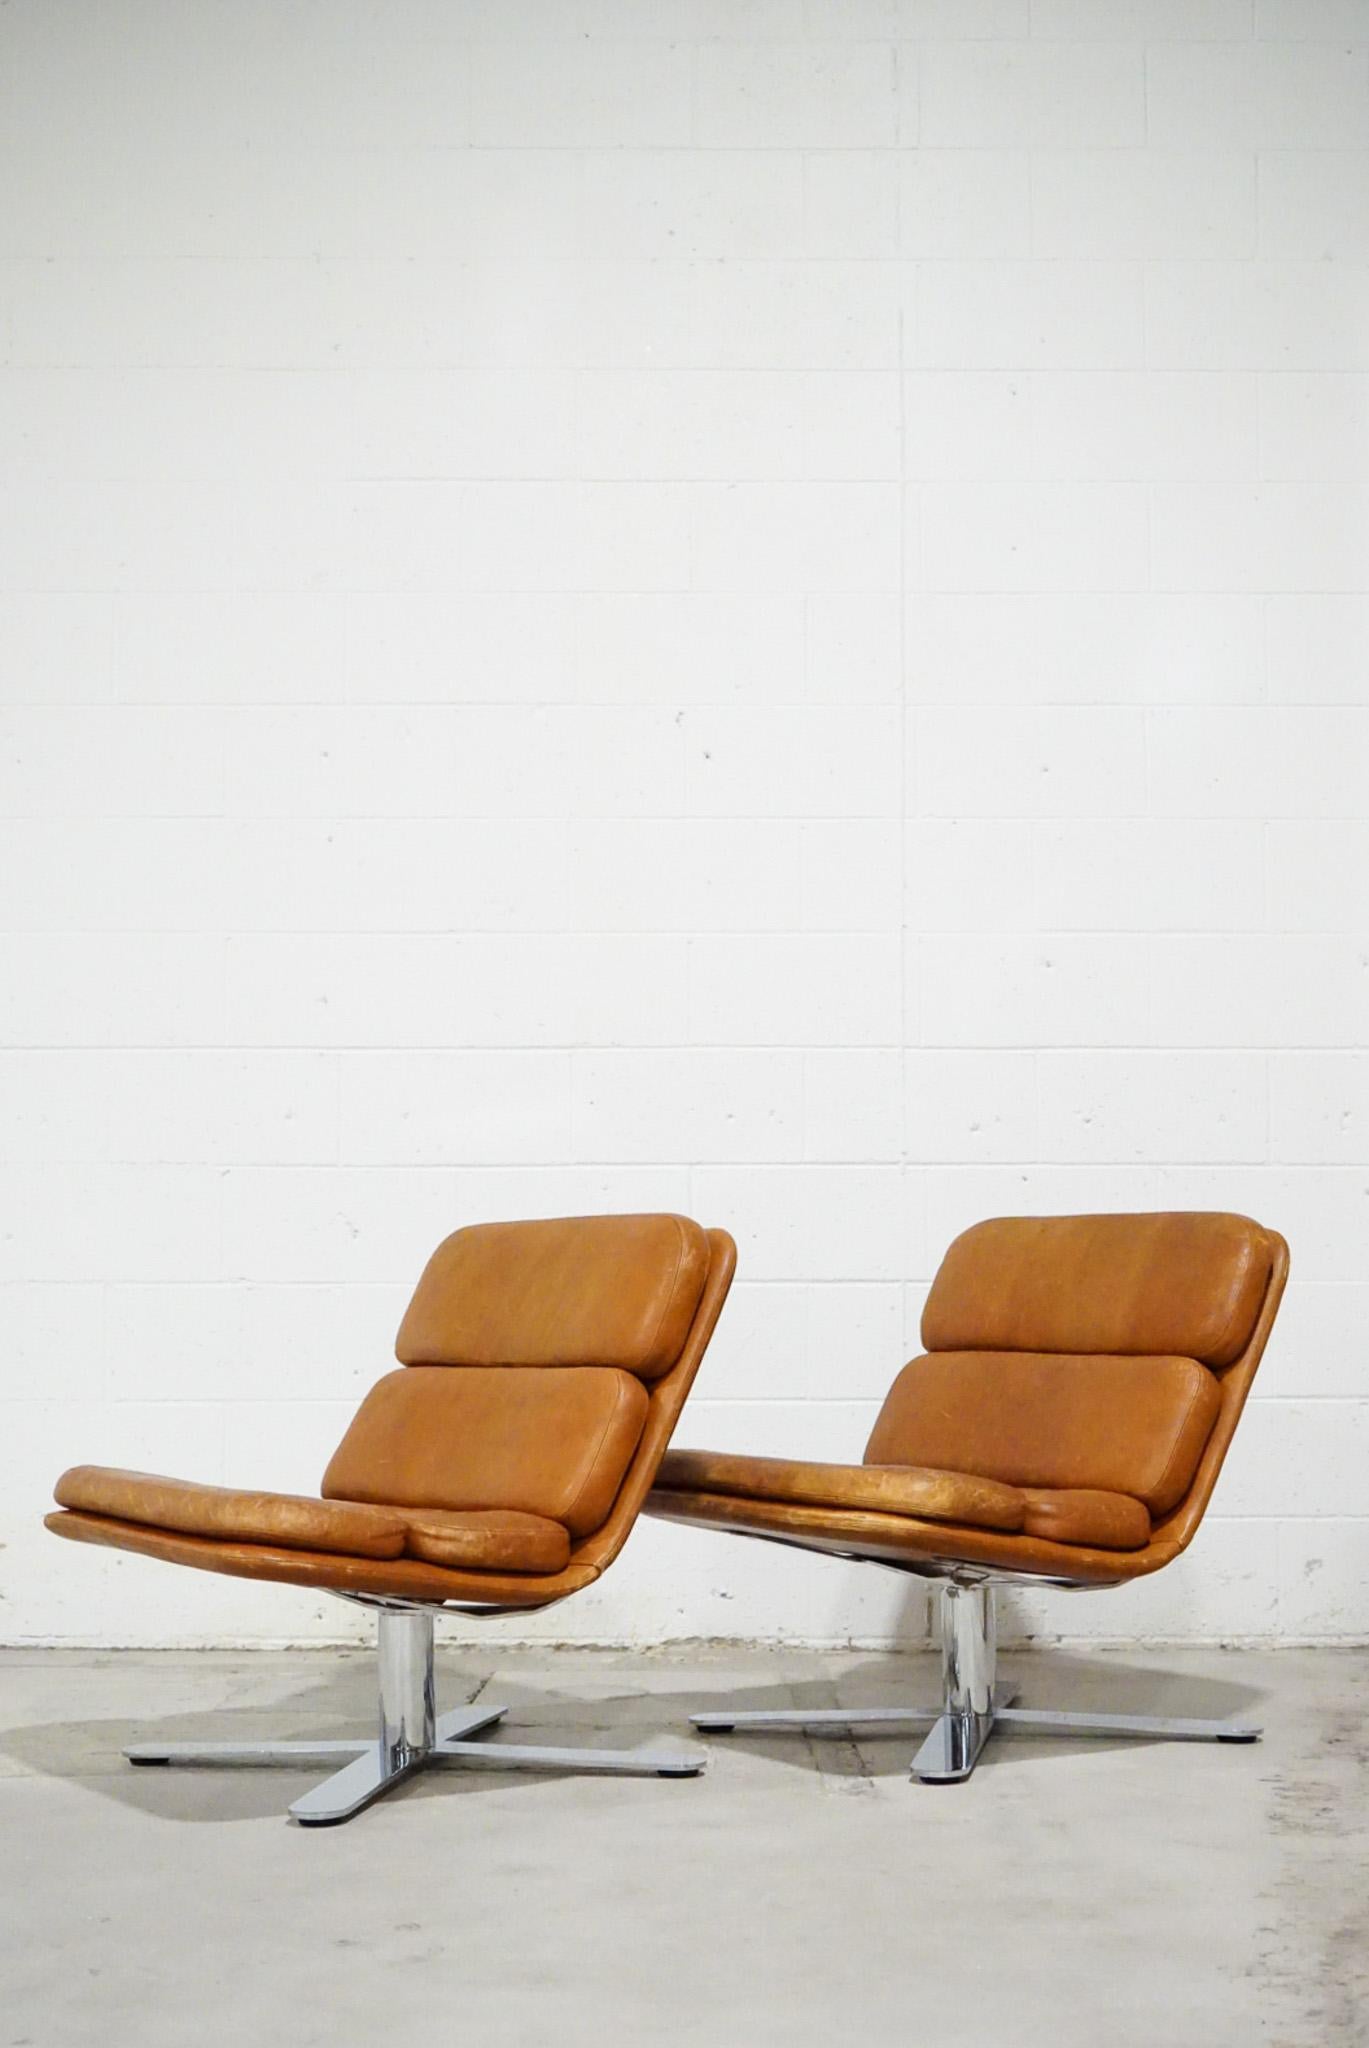 A beautiful patinated pair of vintage leather and chrome lounge chairs designed by John Follis, 1970s.
 
They are known as the 